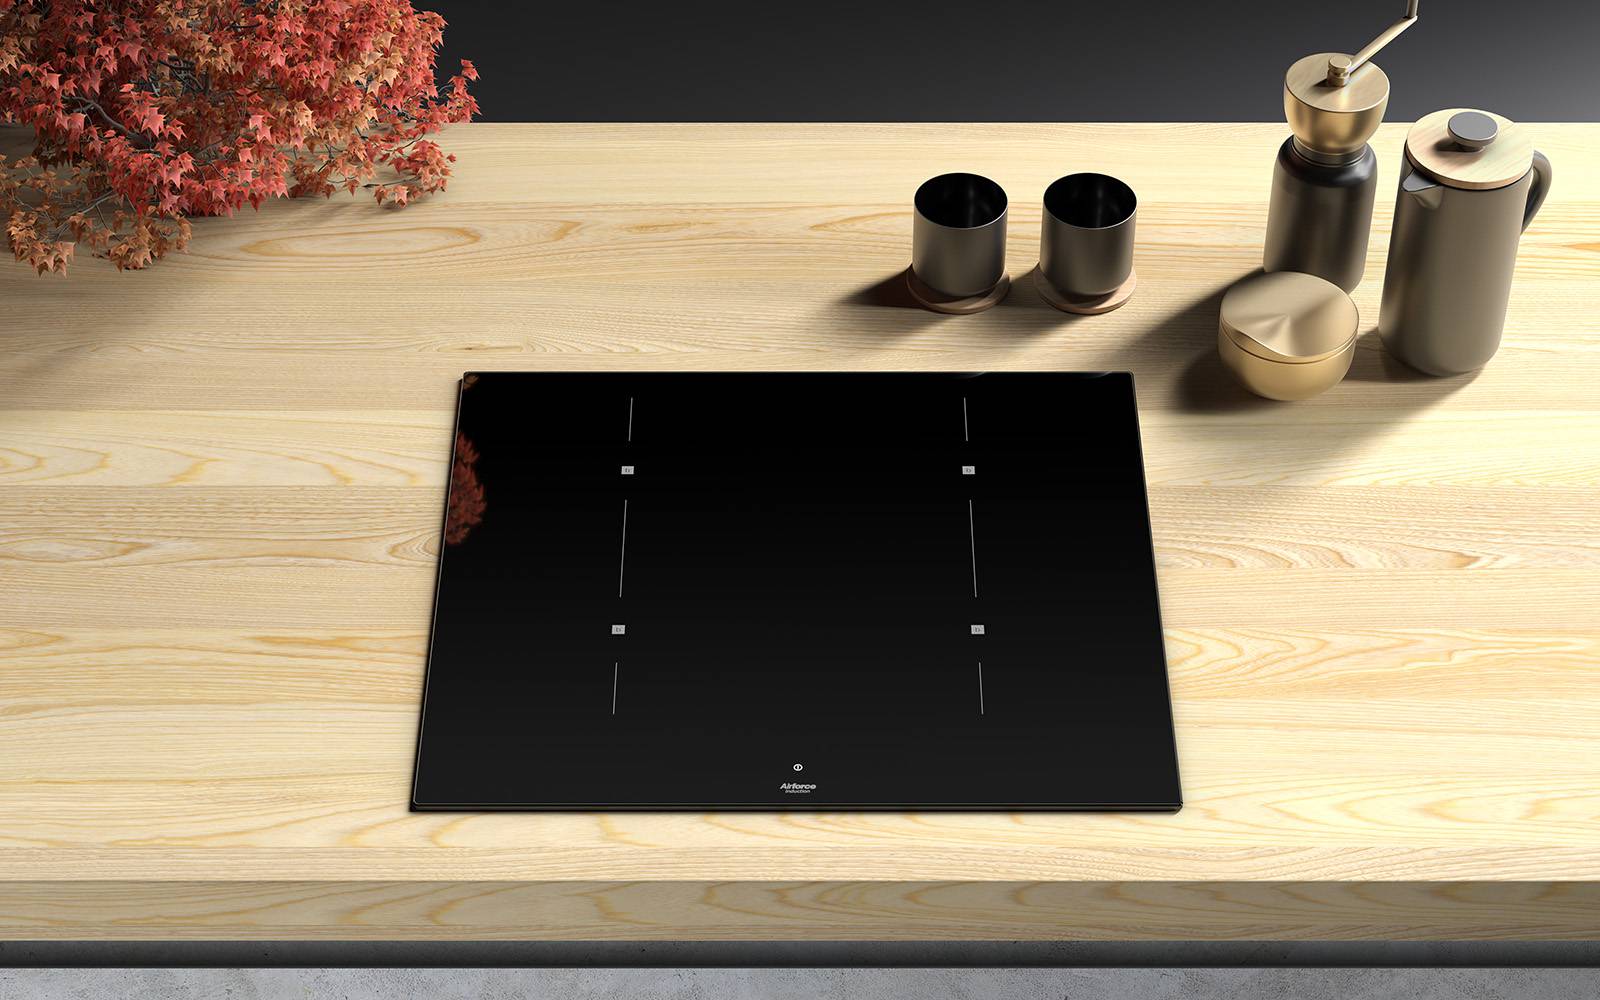 Airforce Smart 60cm Induction Hob with touch control slider & 2 bridgable zones